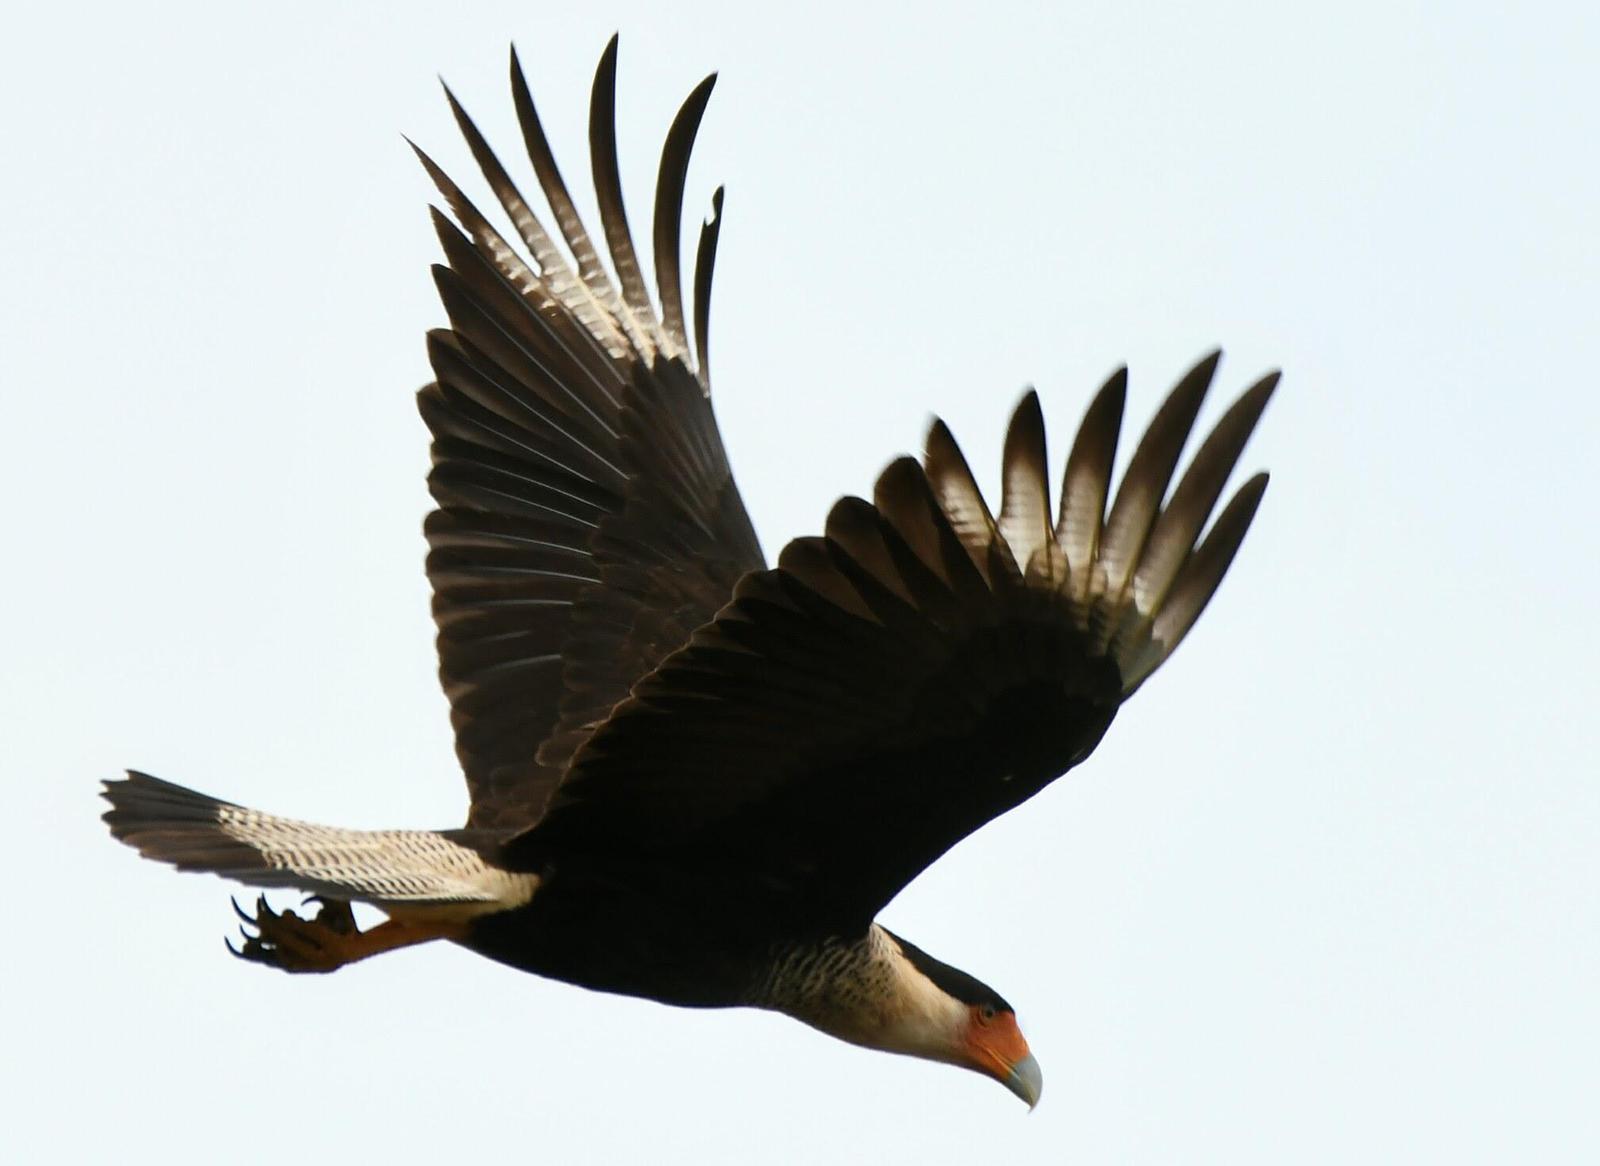 Crested Caracara Photo by Michael Horn